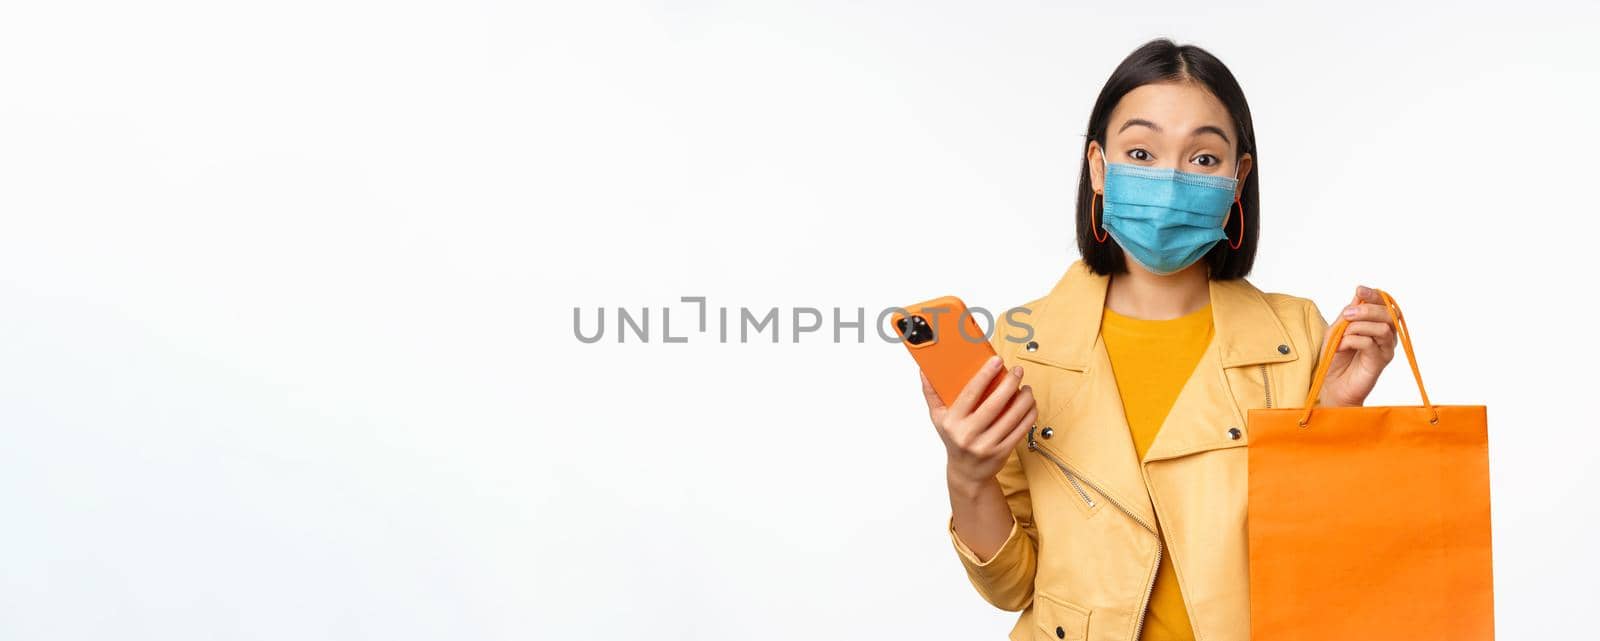 Image of stylish asian girl shopper, holding smartphone and shopping bag without store logo, wearing medical face mask from covid-19, white background.